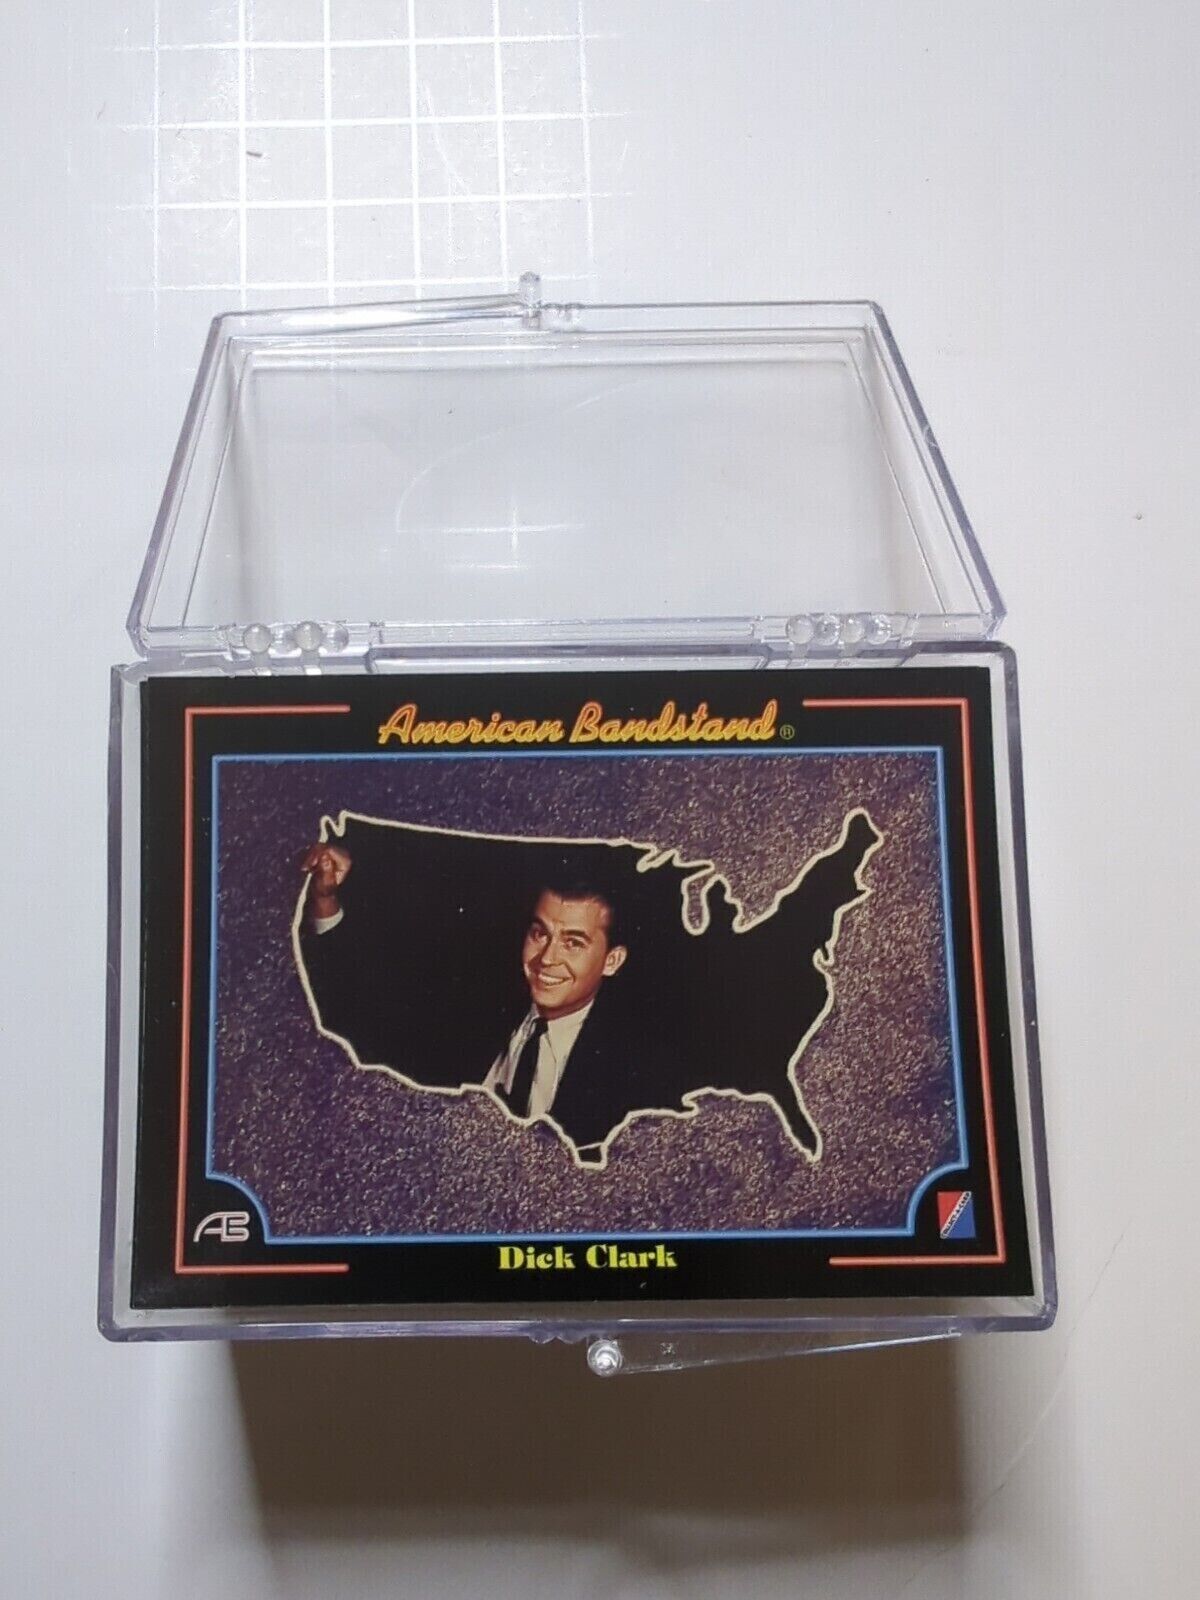 1993 American Bandstand Complete Set Of 100 Trading Cards - Excellent Condition 